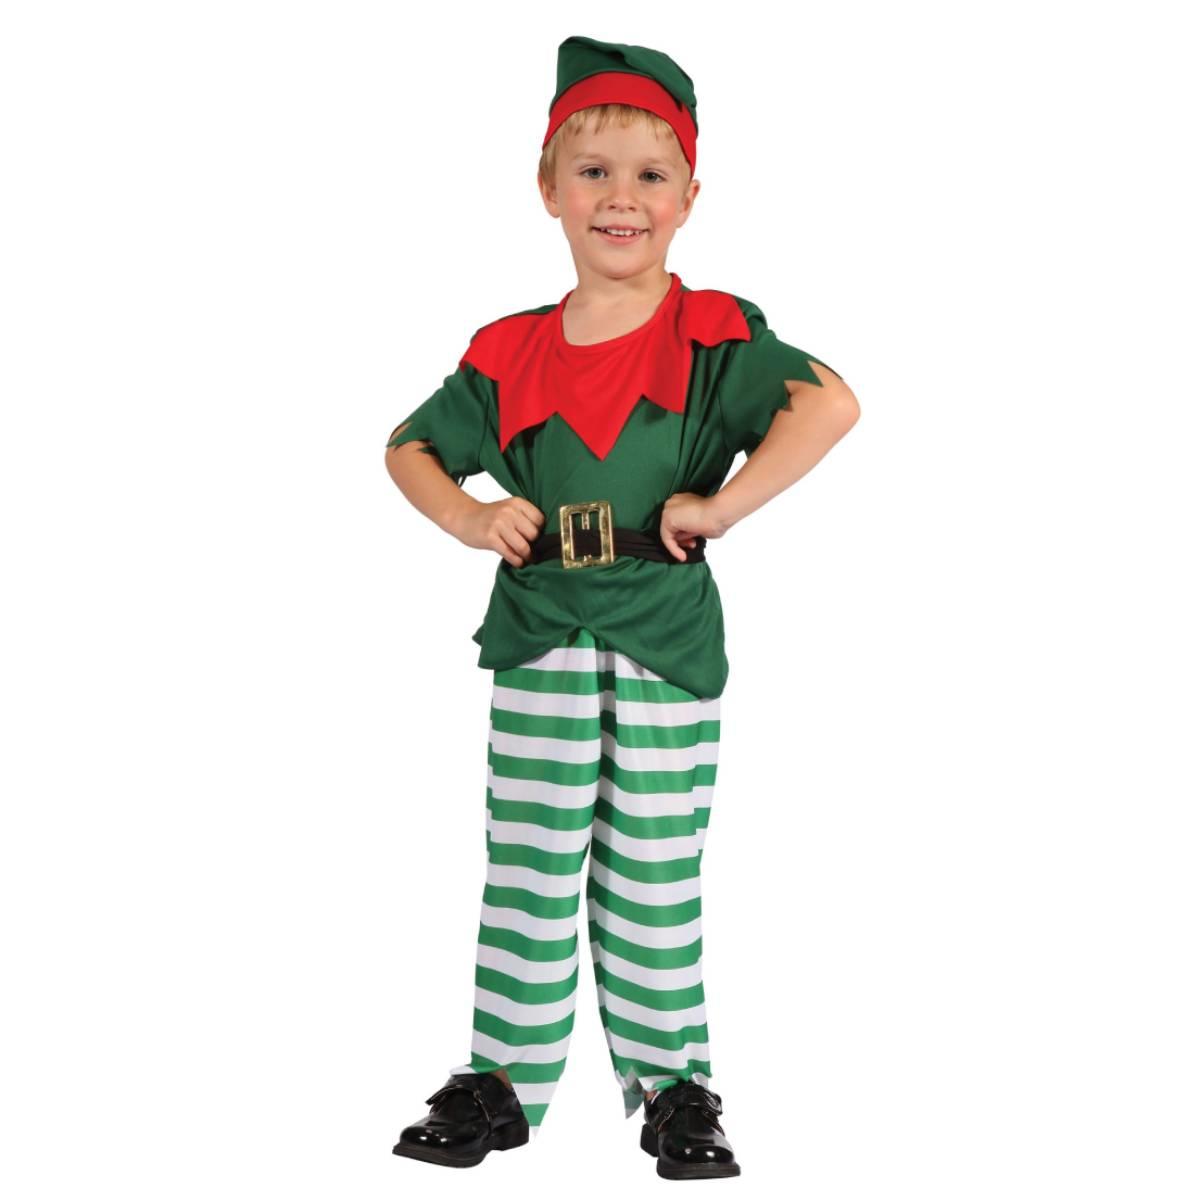 Toddler Christmas Santa Helper fancy dress costume by Bristol Novelties CC072 available here at Karnival Costumes online Christmas party shop